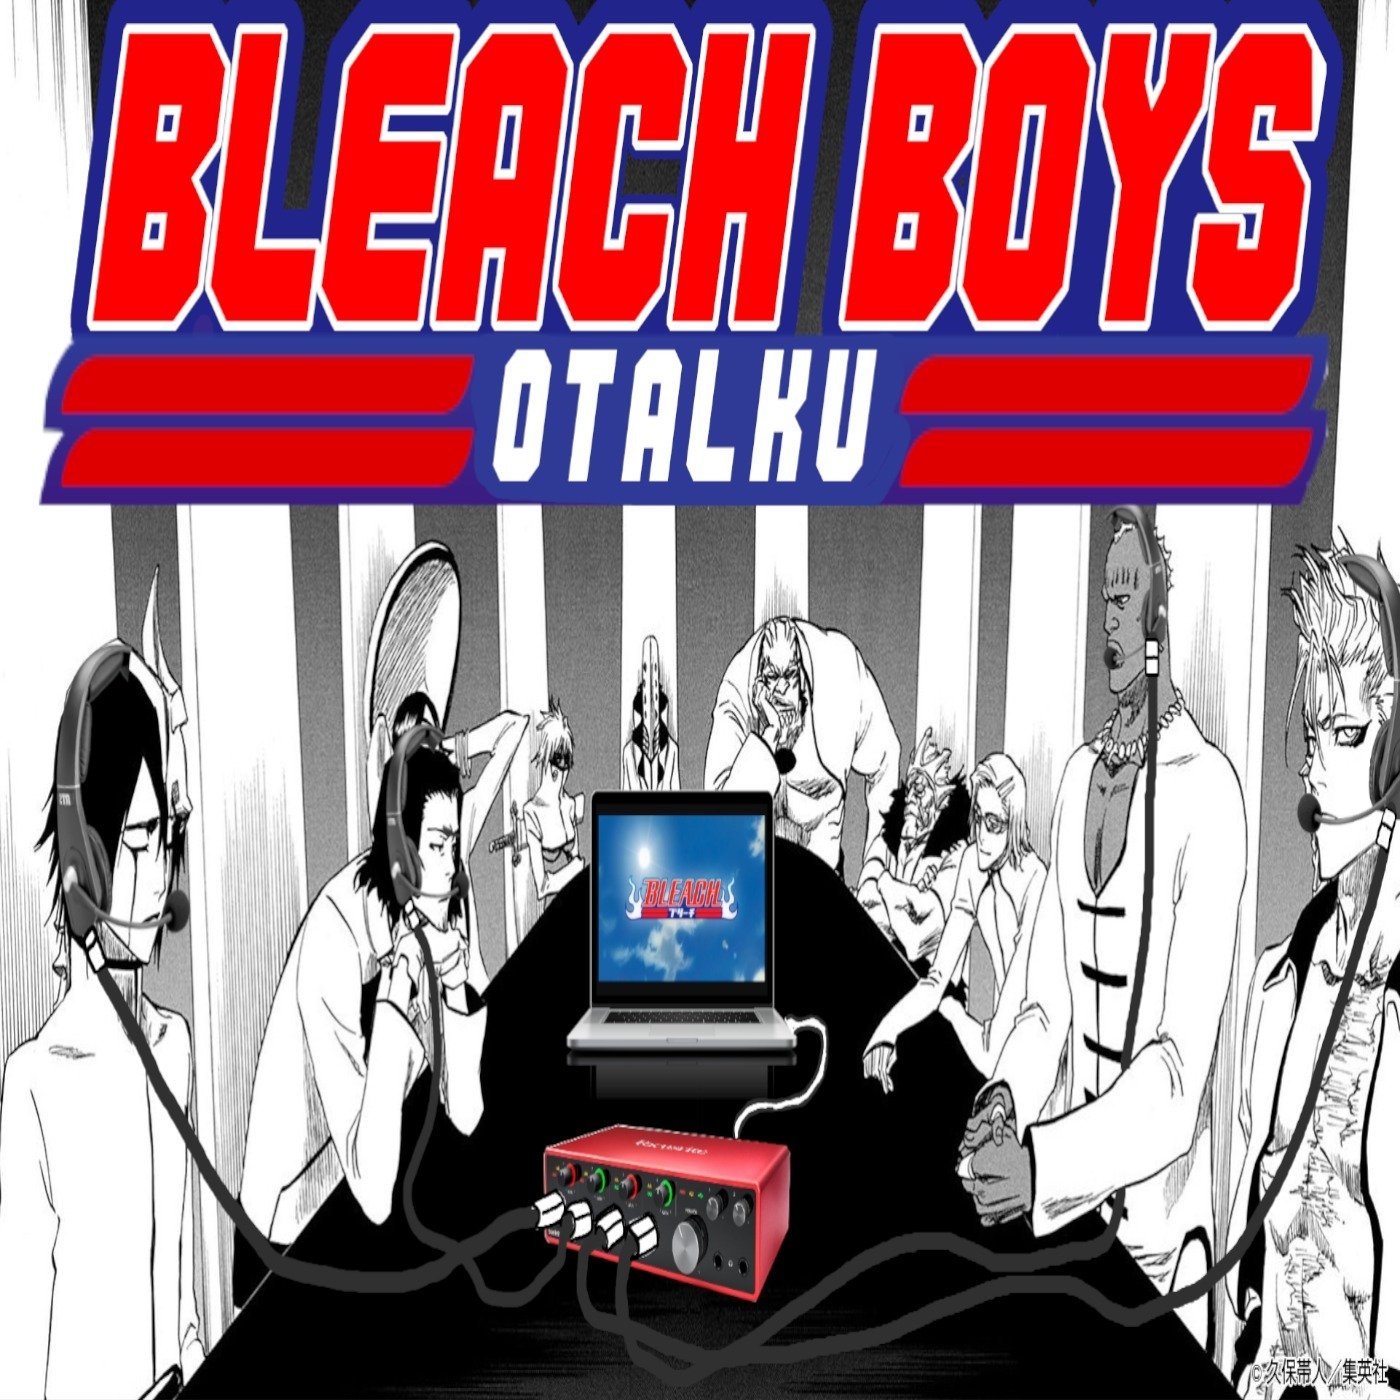 Bleach thousand years of blood war episode 18 Rages at ringside